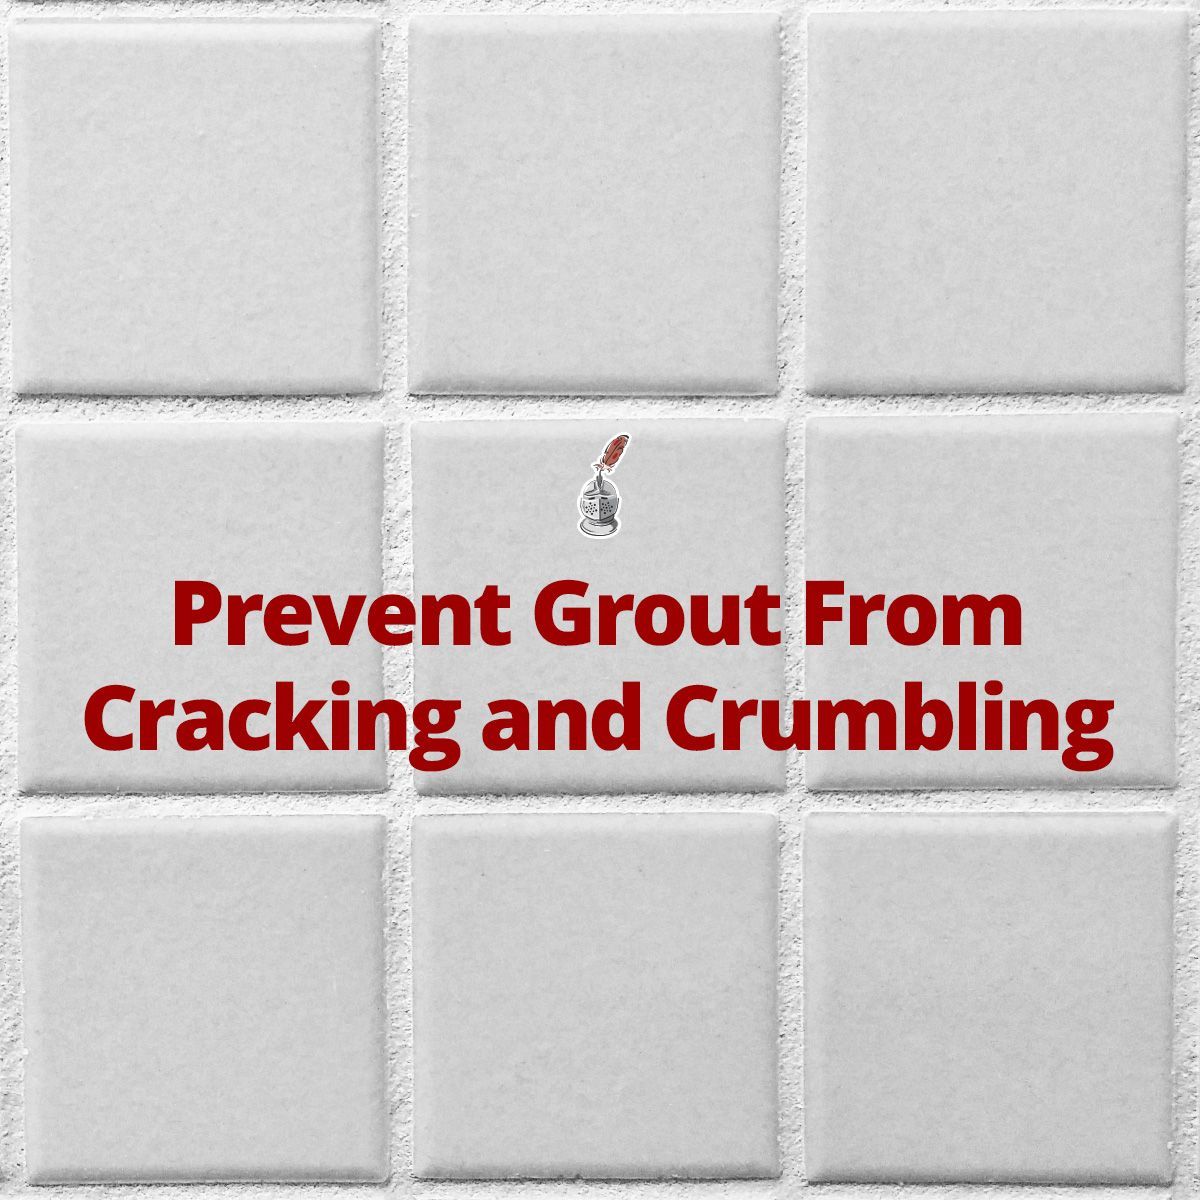 Prevent Grout From Cracking and Crumbling